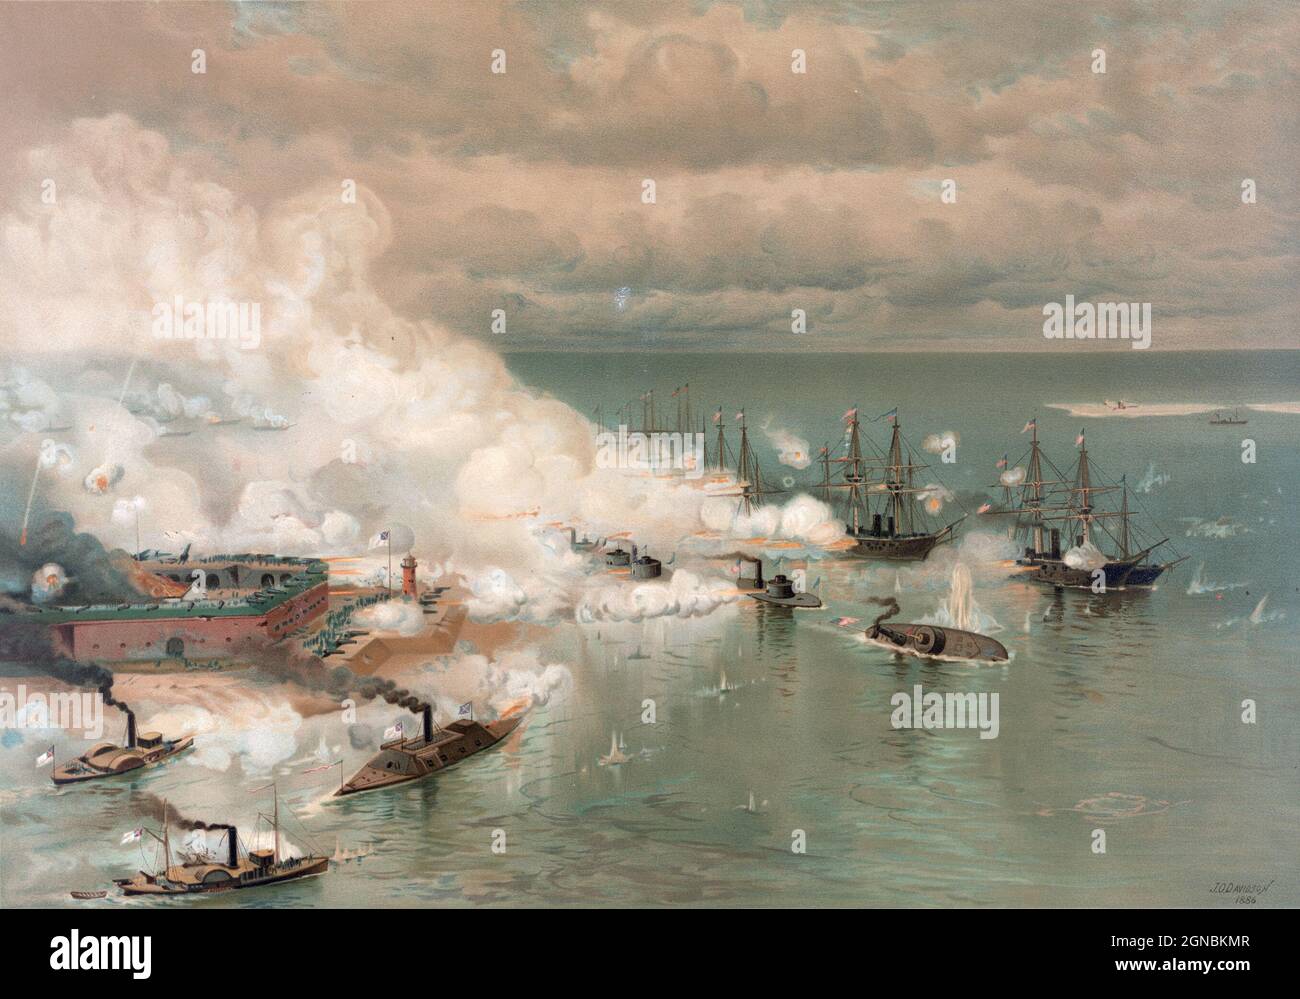 Battle of Mobile Bay, by Louis Prang. At left foreground is the CSS Tennessee; at the right the USN Tecumseh is sinking. Stock Photo